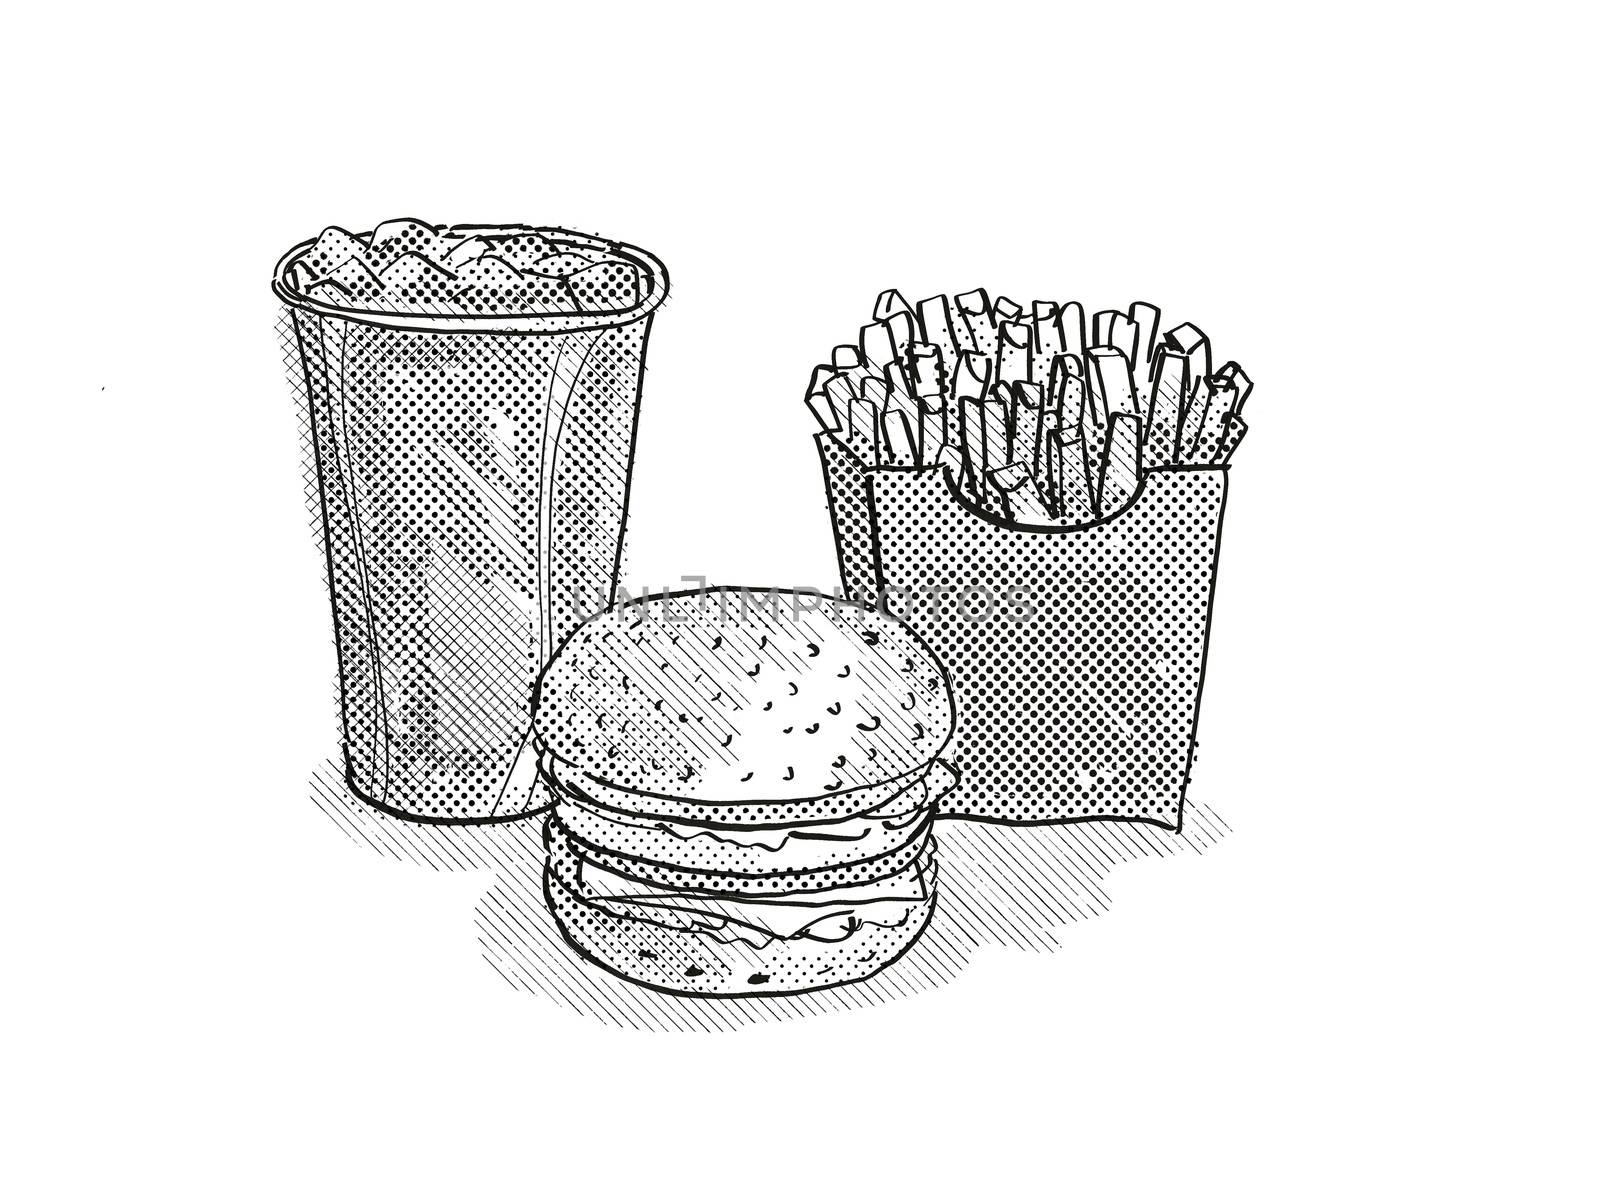 Retro cartoon style drawing of a hamburger or cheeseburger burger, small  fries and soft drink in fountain cup on isolated white background done in black and white